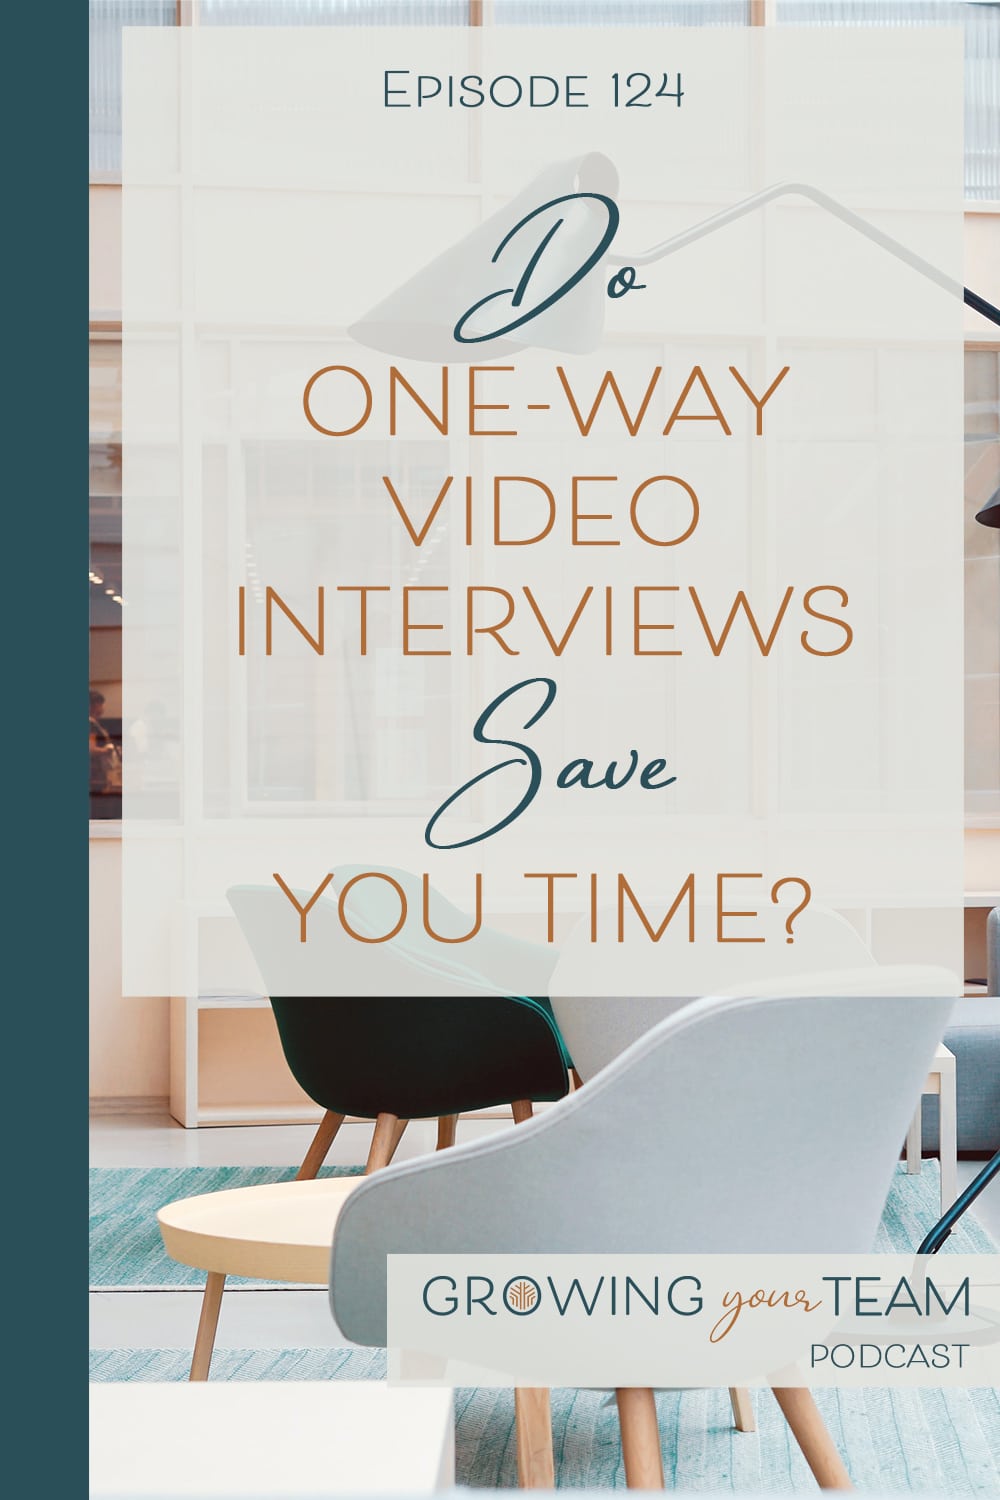 One-way video interviews, Growing You Team Podcast, Jamie Van Cuyk, Small Business